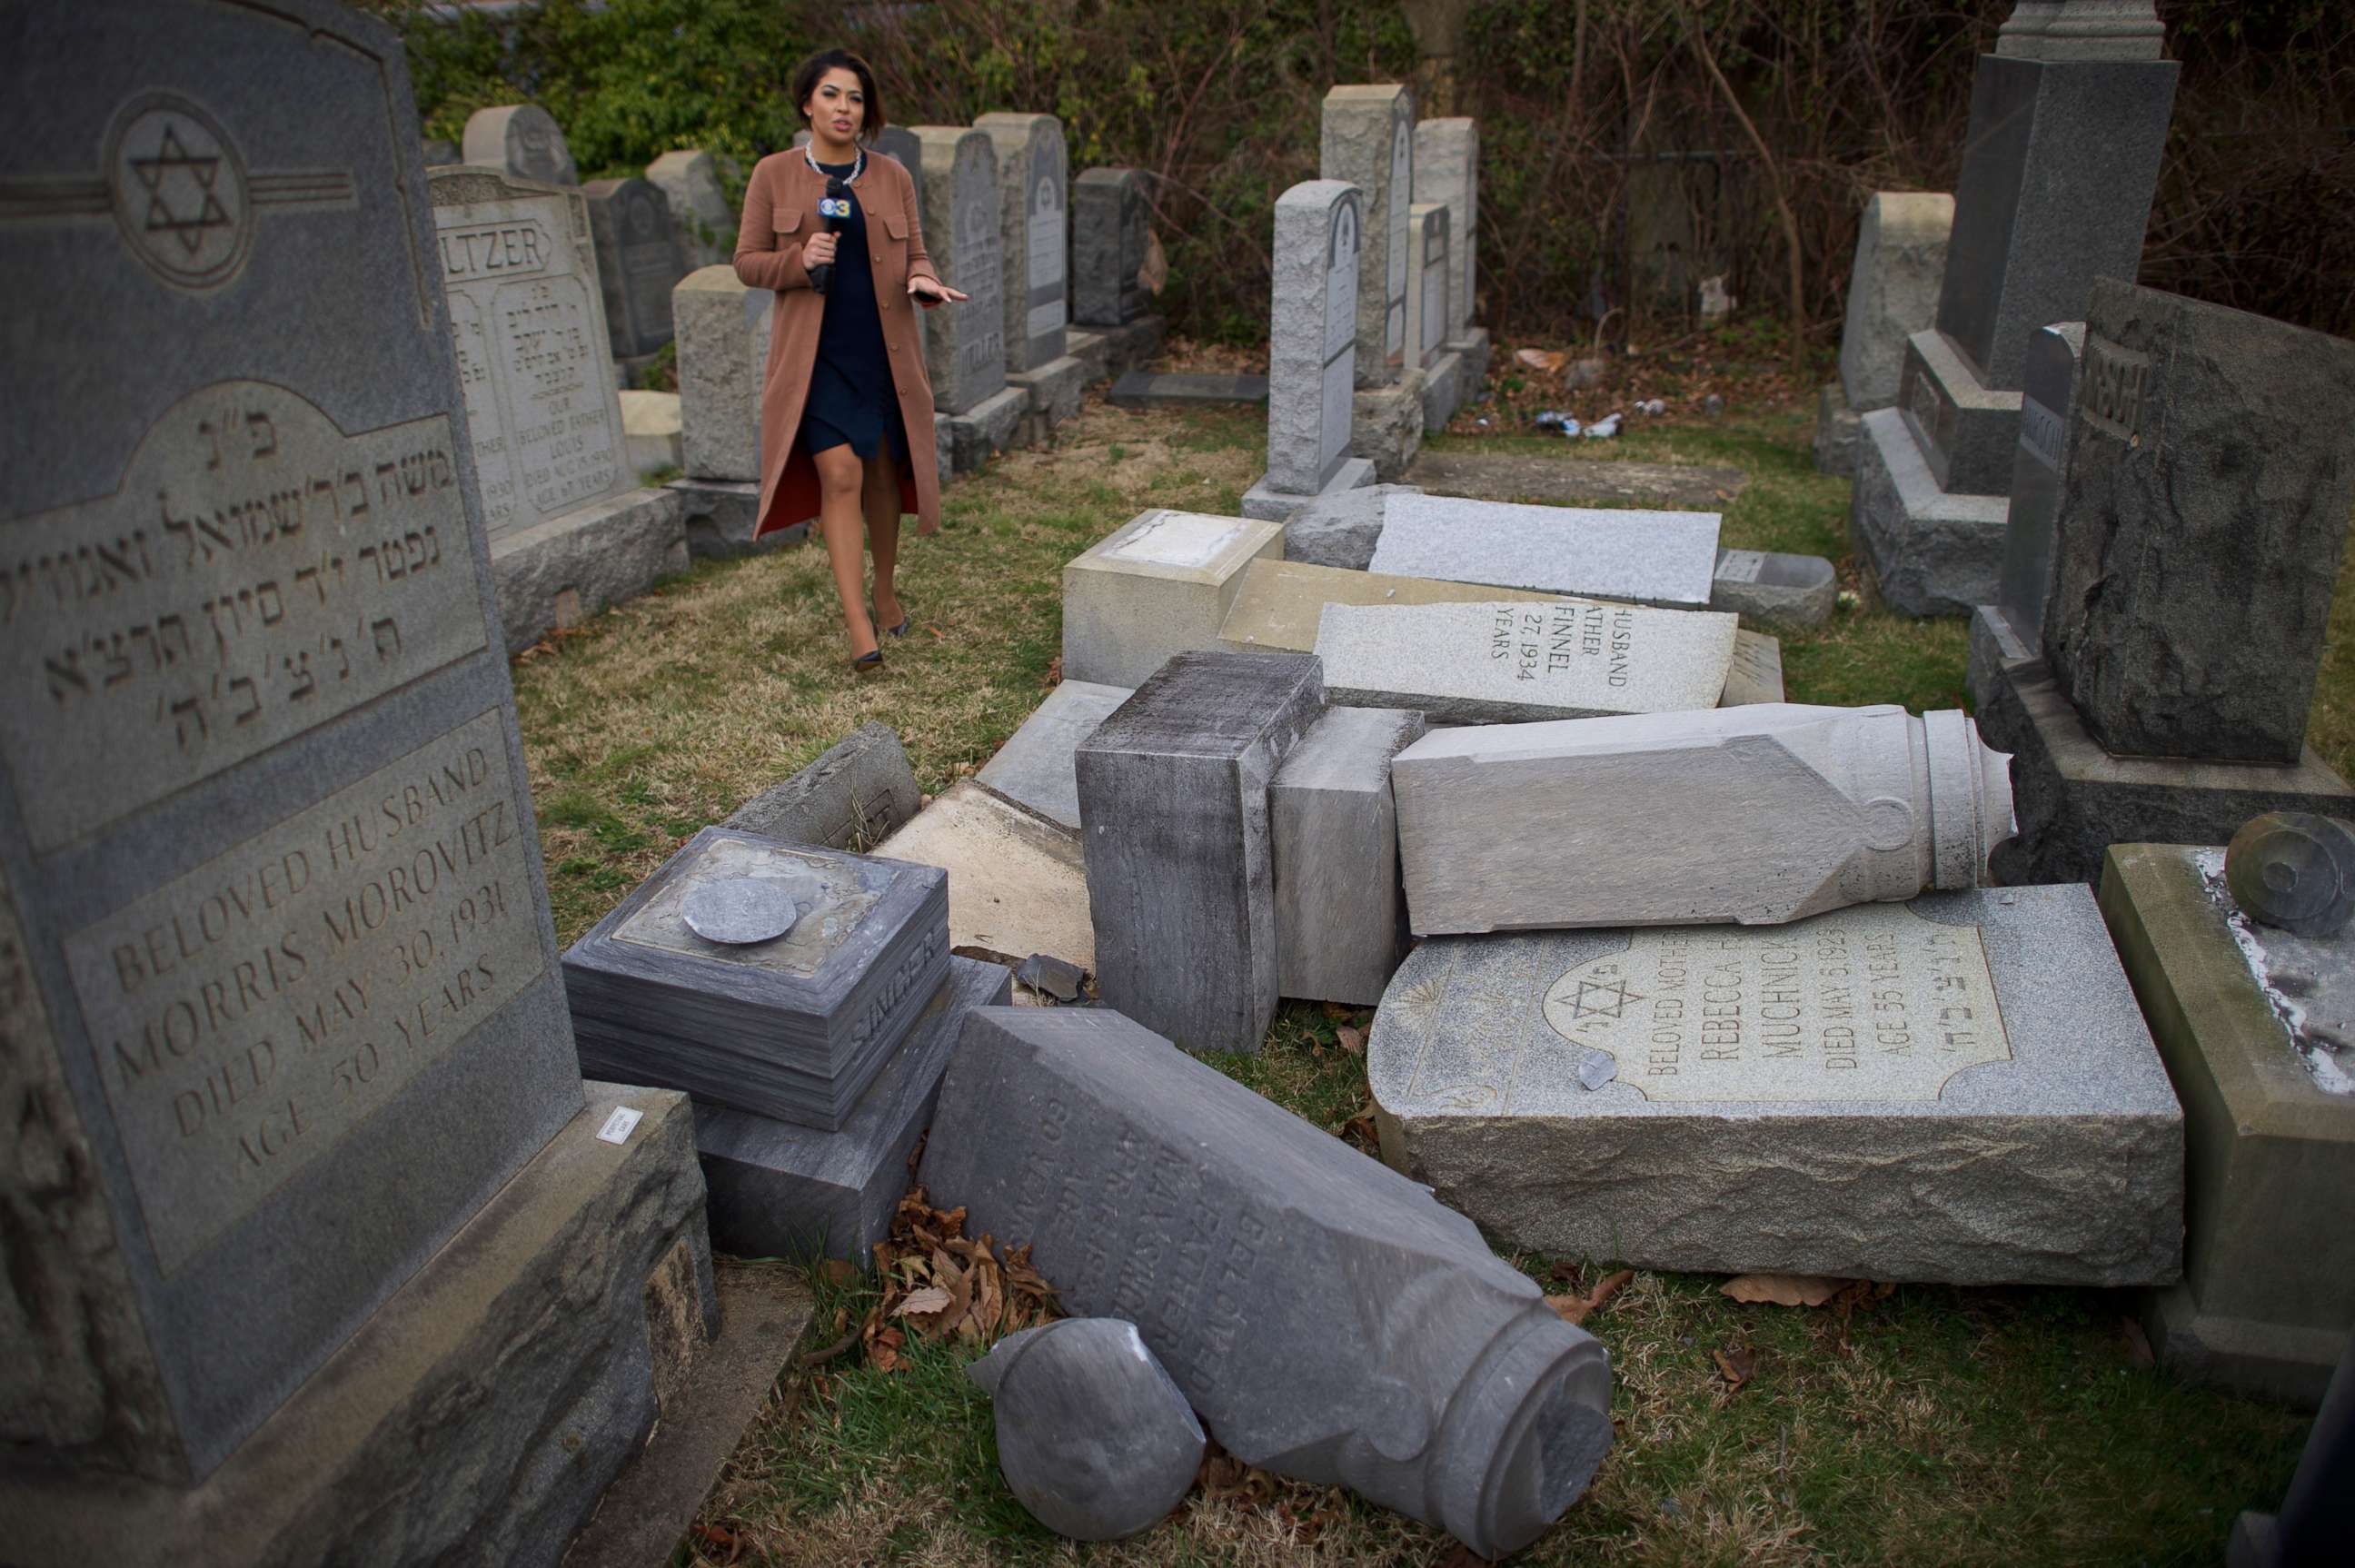 PHOTO: A television reporter broadcasts in front of vandalized Jewish tombstones at Mount Carmel Cemetery Feb. 27, 2017 in Philadelphia.